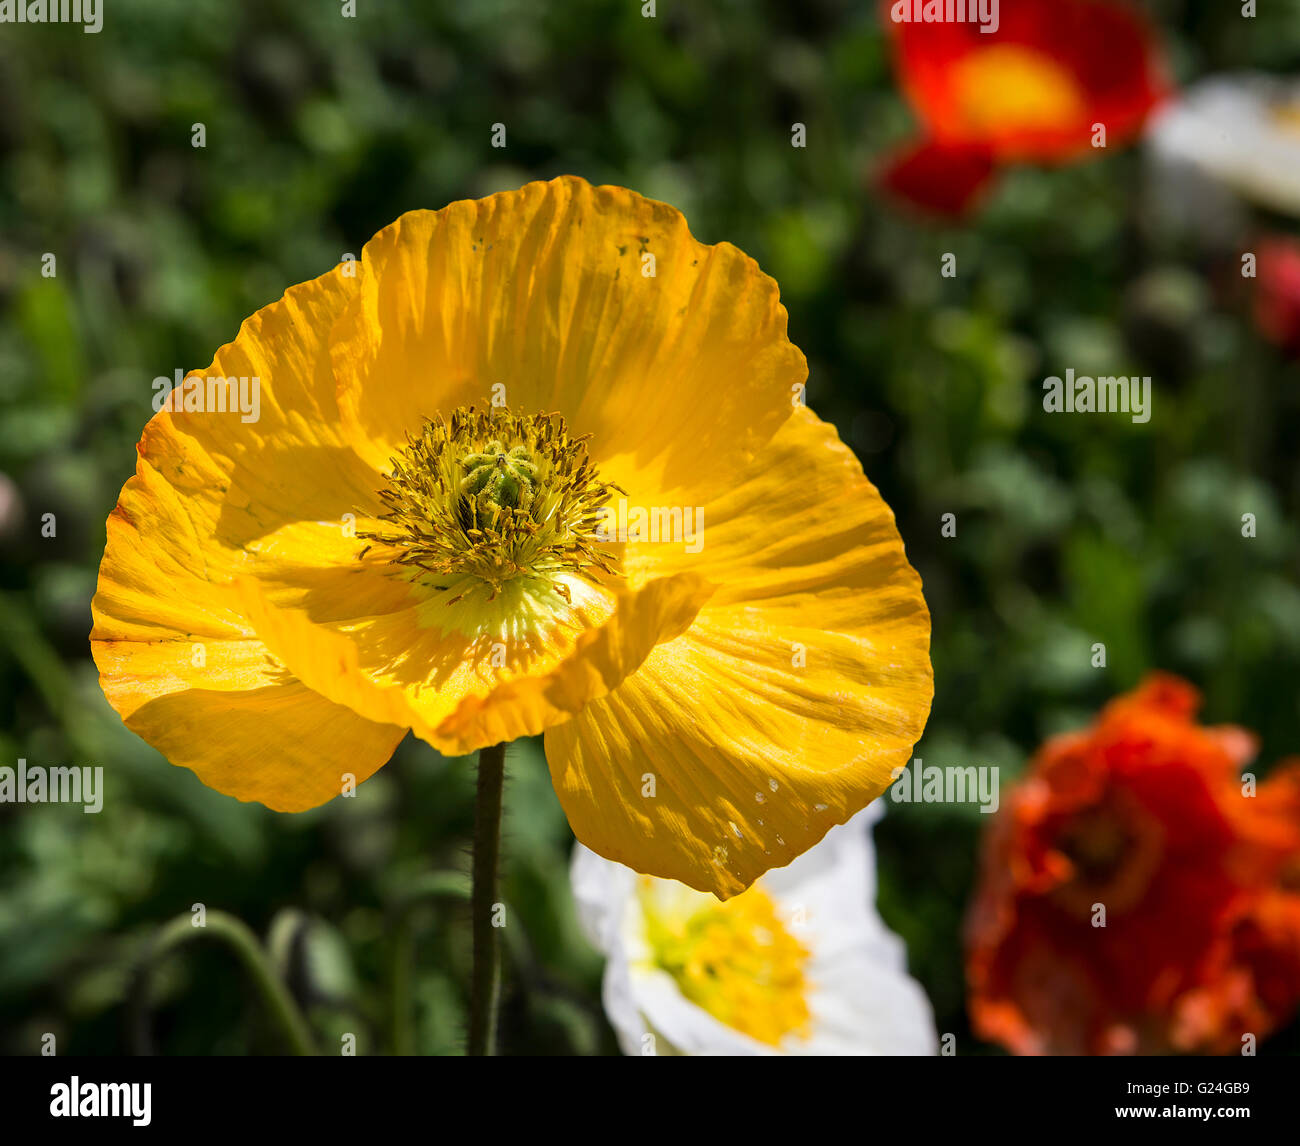 Yellow flower head of an Icelandic Garden Gnome Poppy plant with yellow stamen and scarlet and white flowers behind Stock Photo